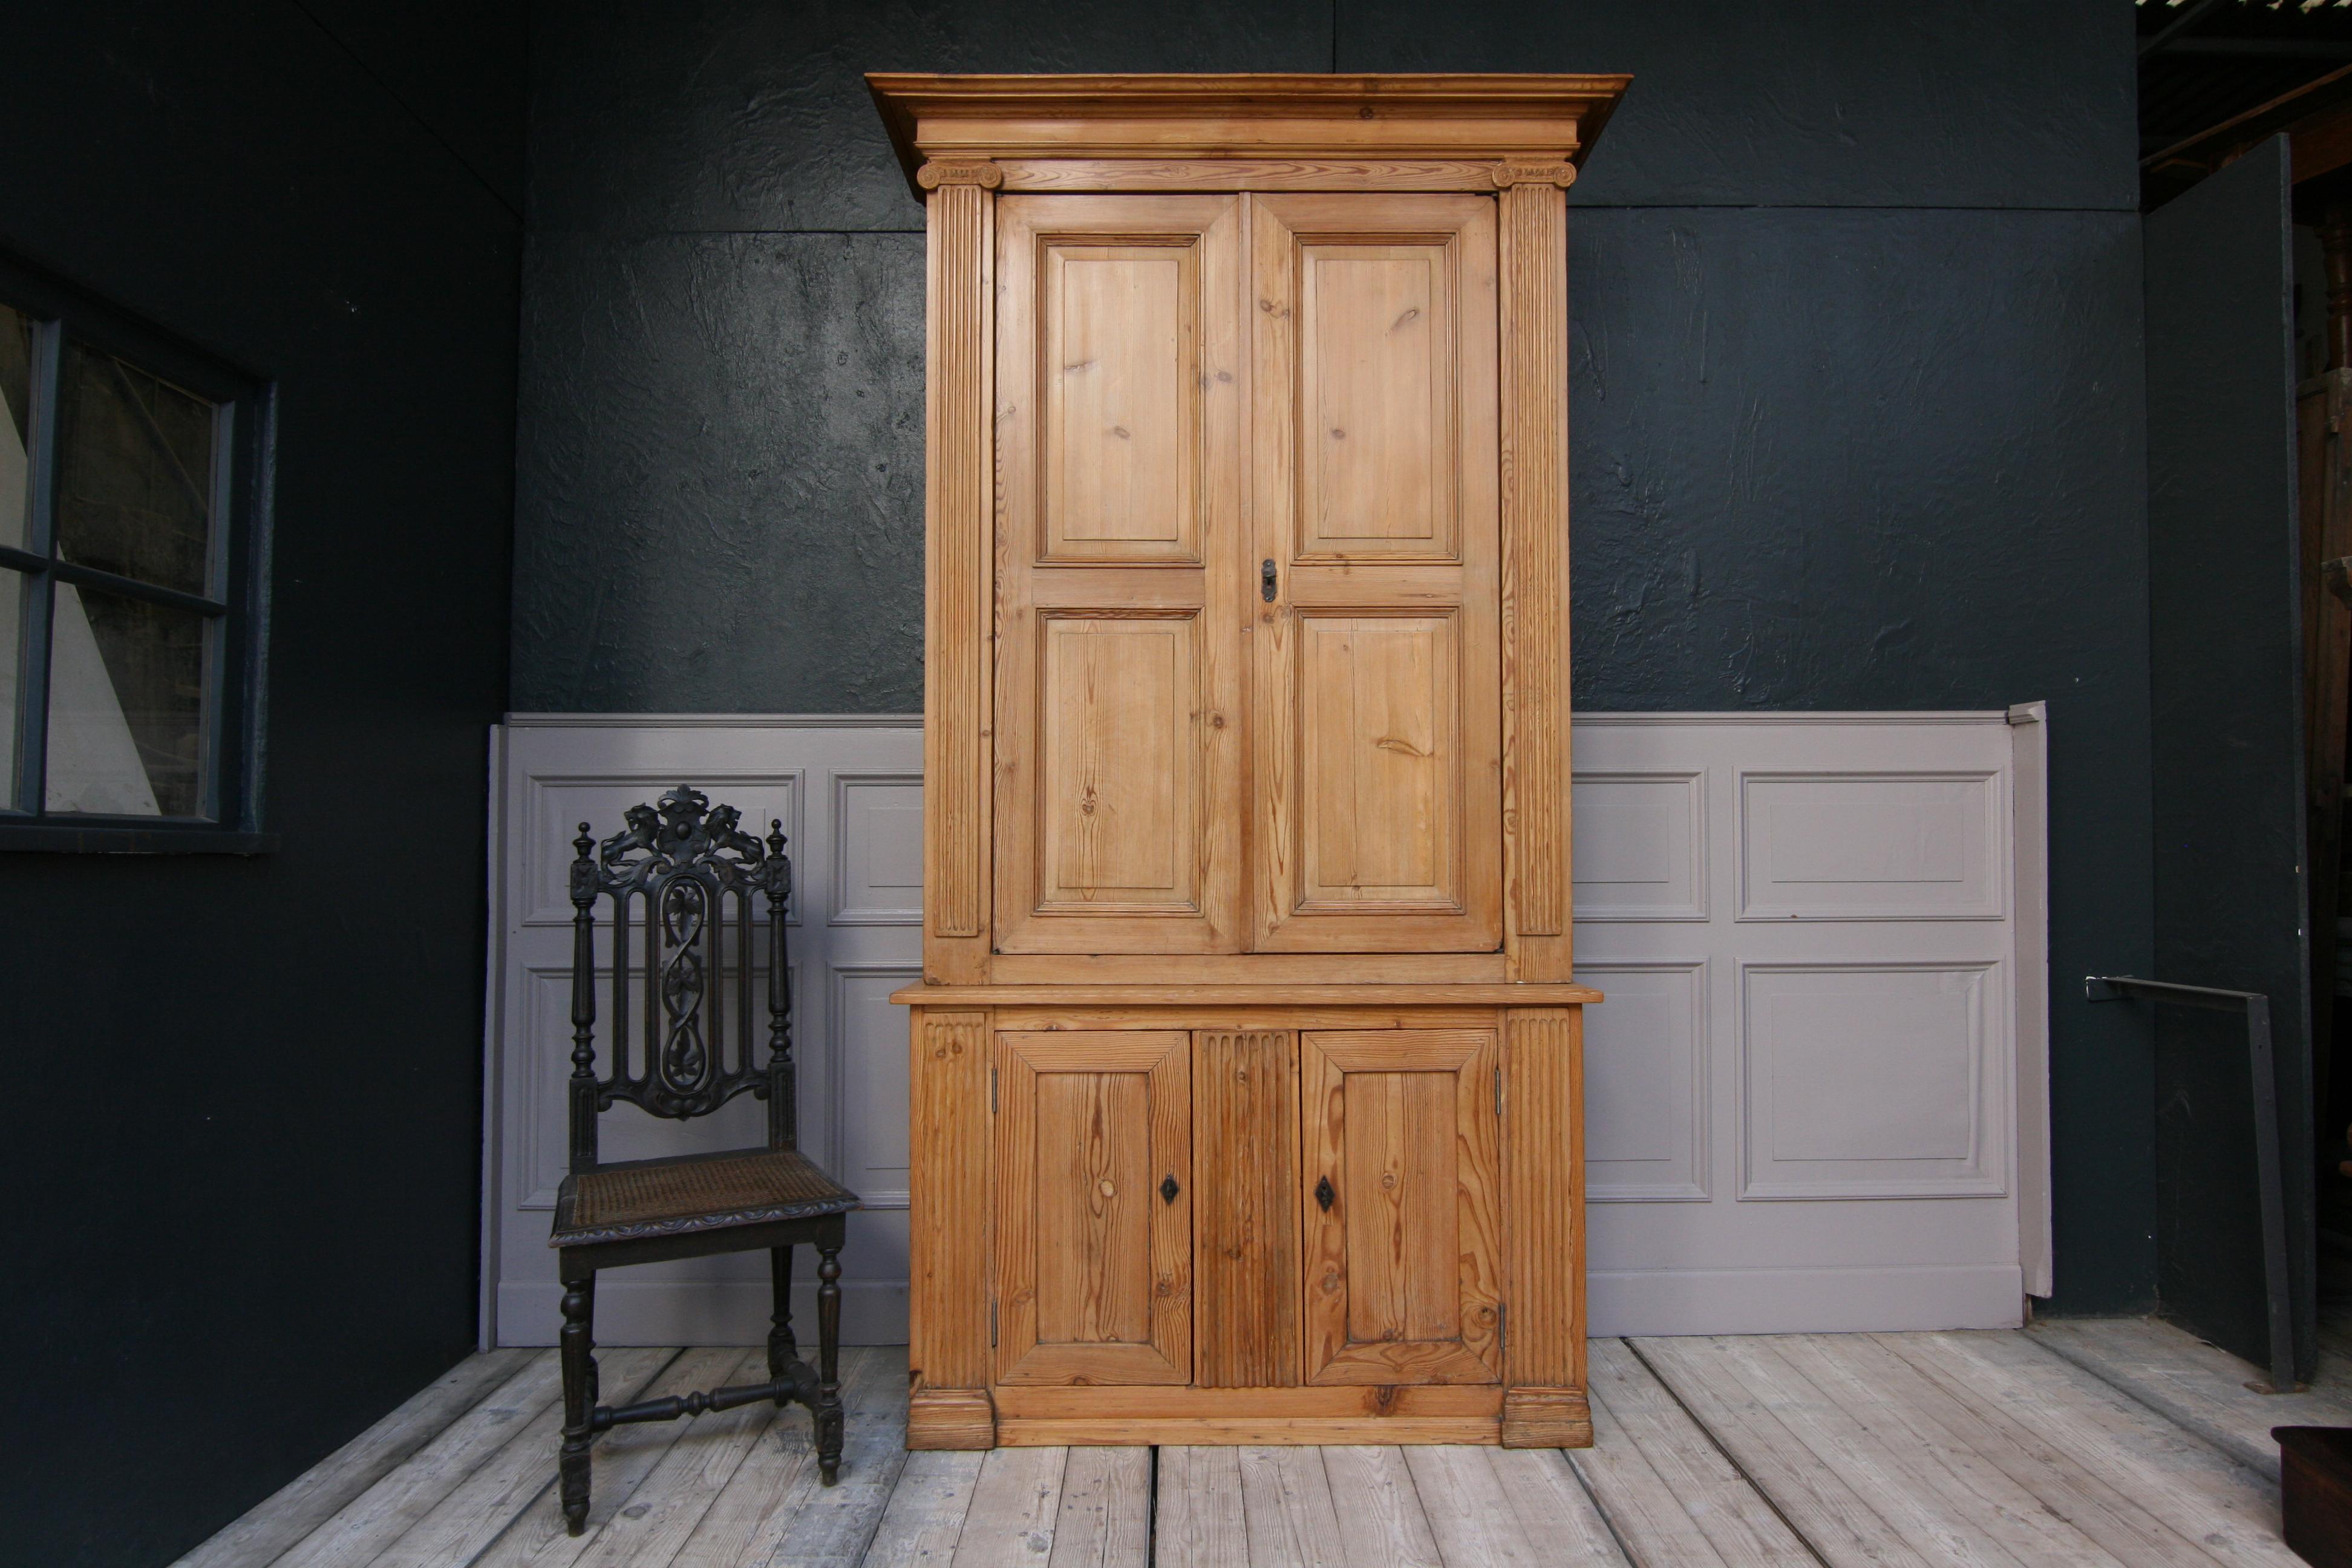 A 19th Century French bookcase in Renaissance style, made of solid pine.

Consists of an upper and a lower part with a total of 4 doors.

Facade-like front. Pilaster strips with fluted pilasters, both on the lower and upper part. Starting at the